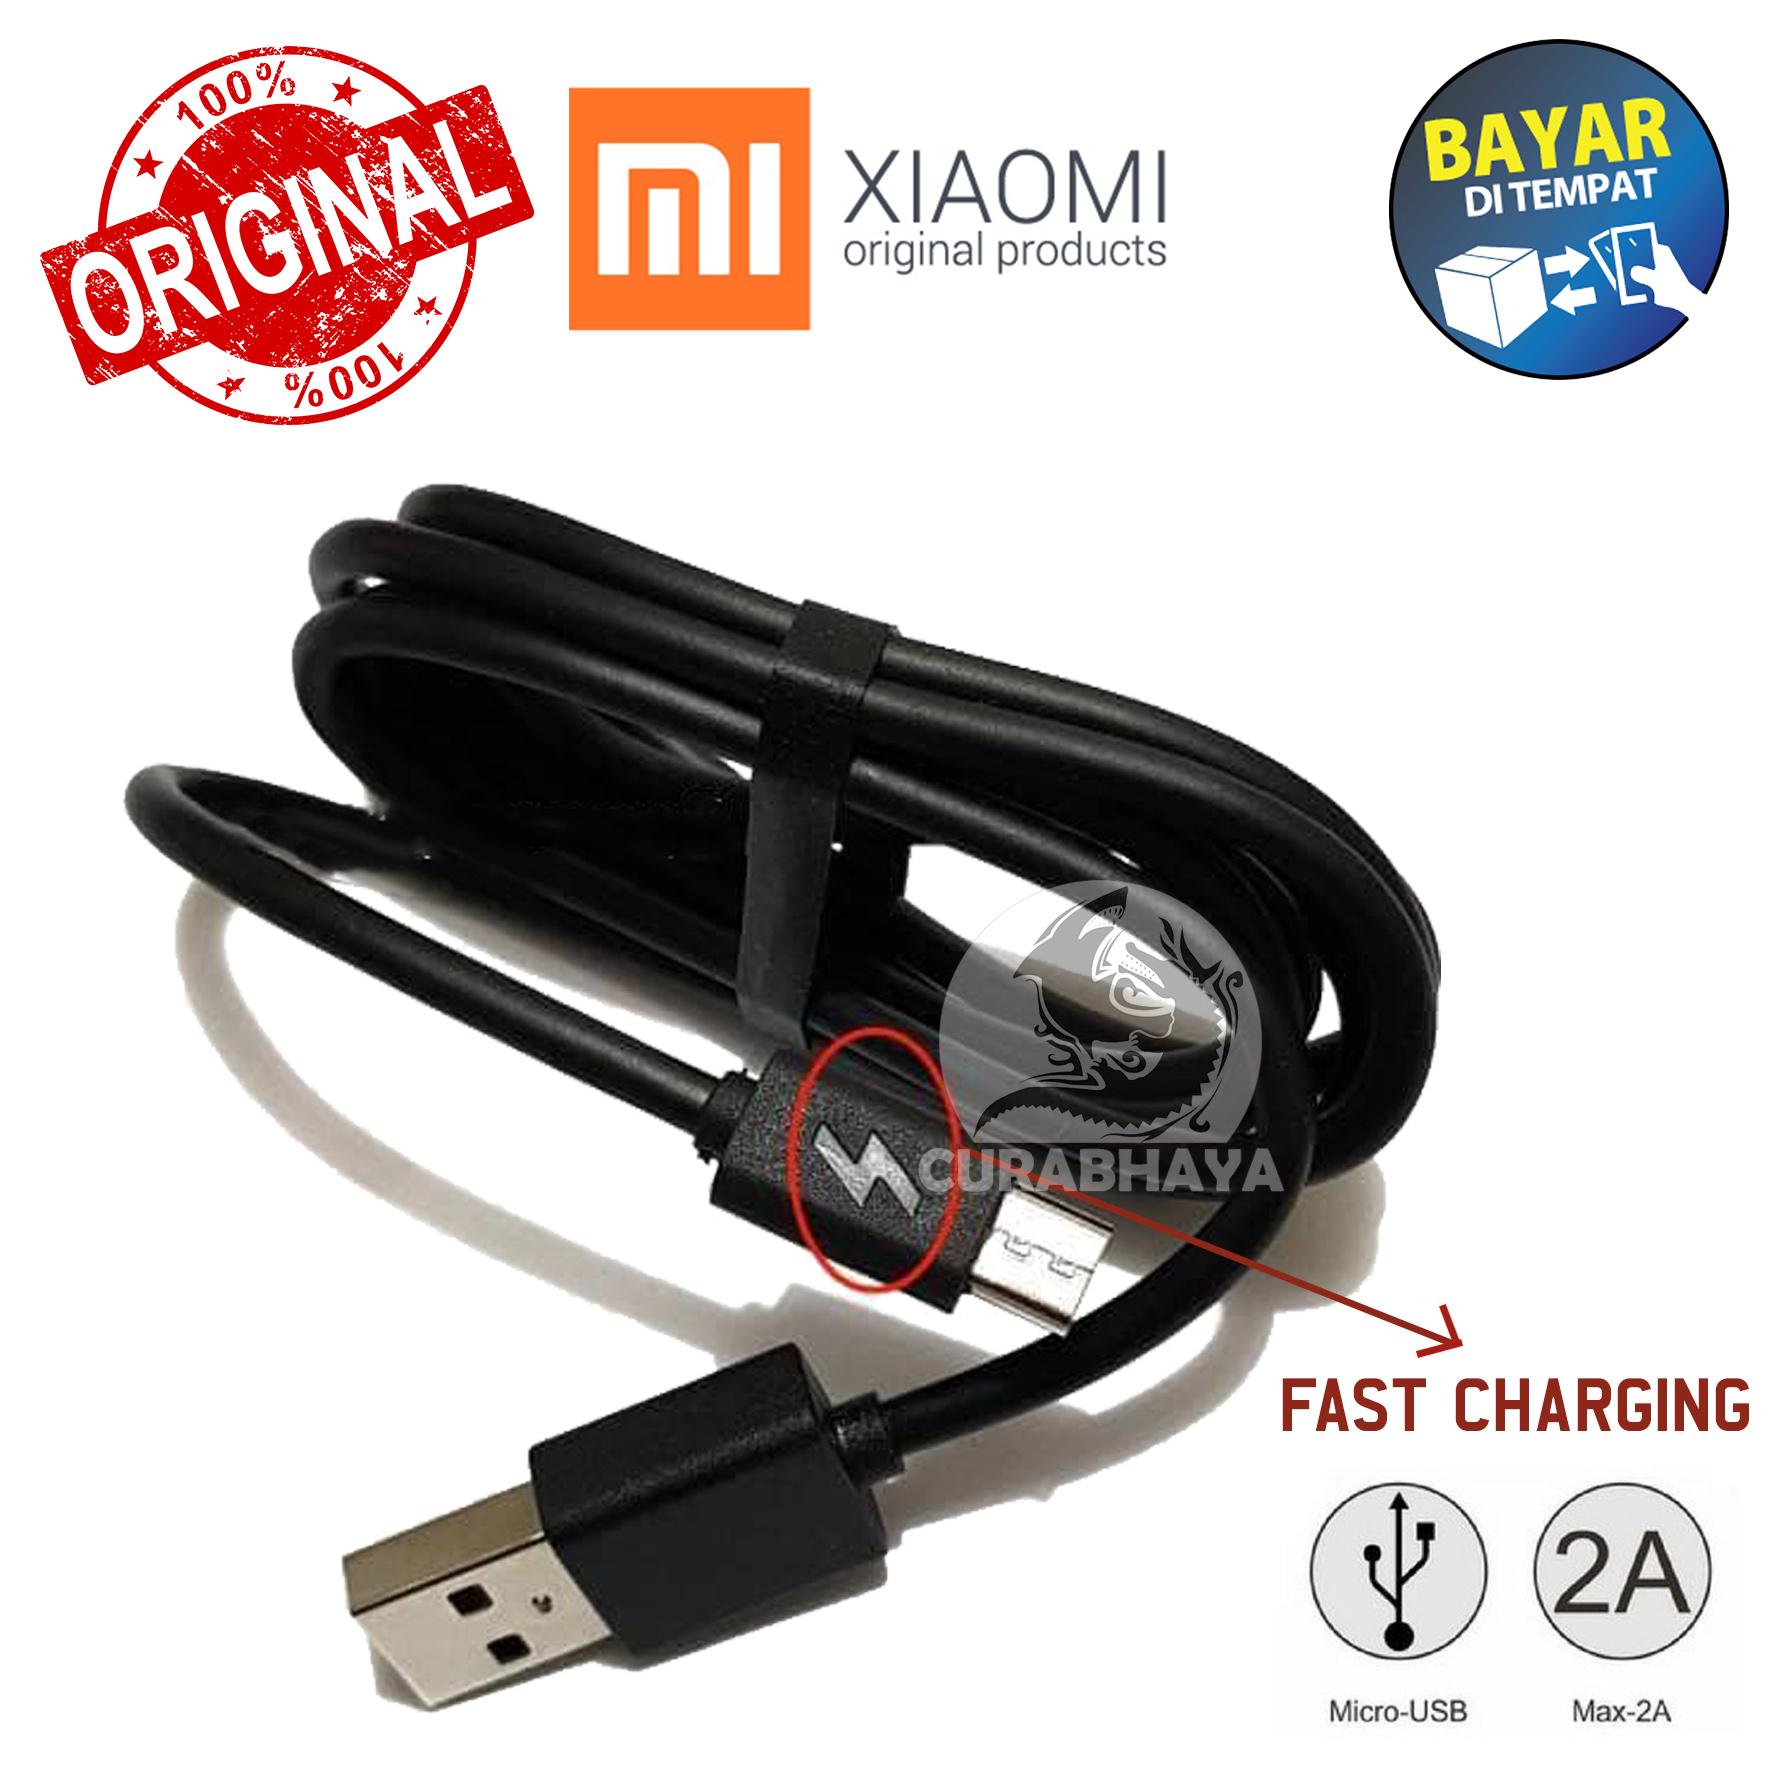 Curabhaya Data Cable / Kabel Data Charger Xiaomi Micro USB 2A Original OEM Fast Charging for Redmi 1S 2S 3 4 4A 5A 6 6A Pro Note 1 2 3 5A 4X Mi4i